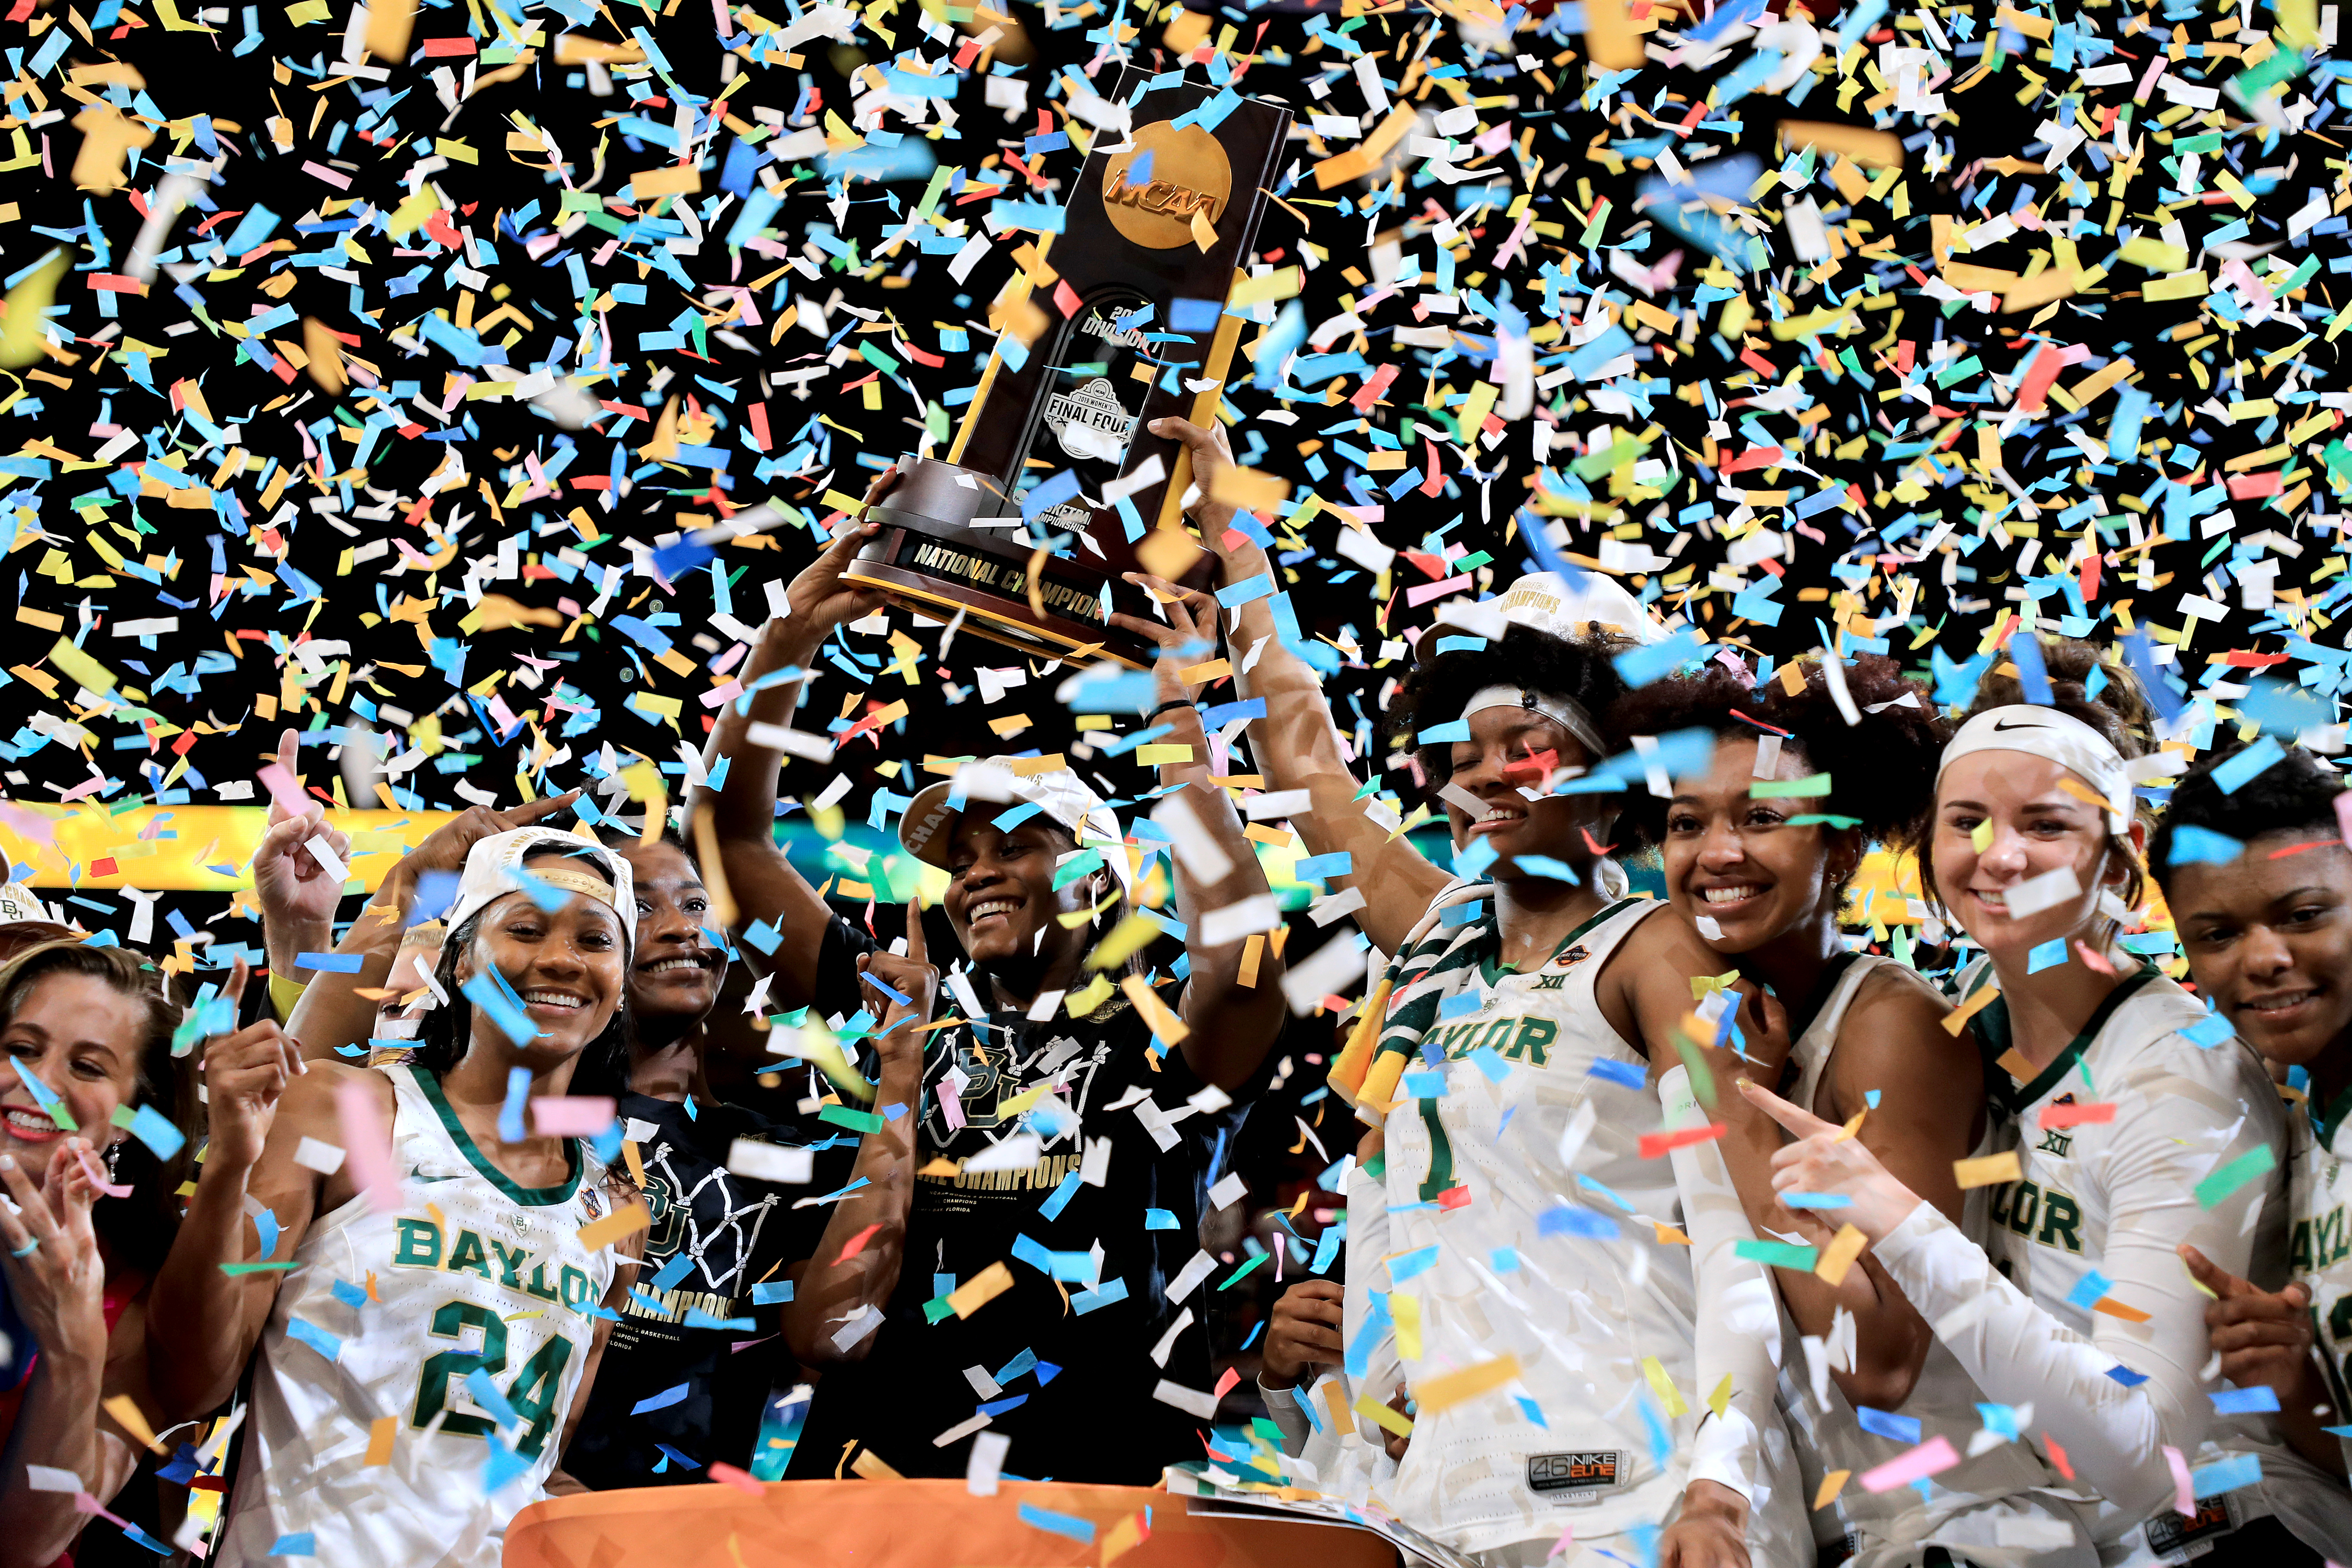 Final Call: Baylor wins title over Notre Dame, 82-81